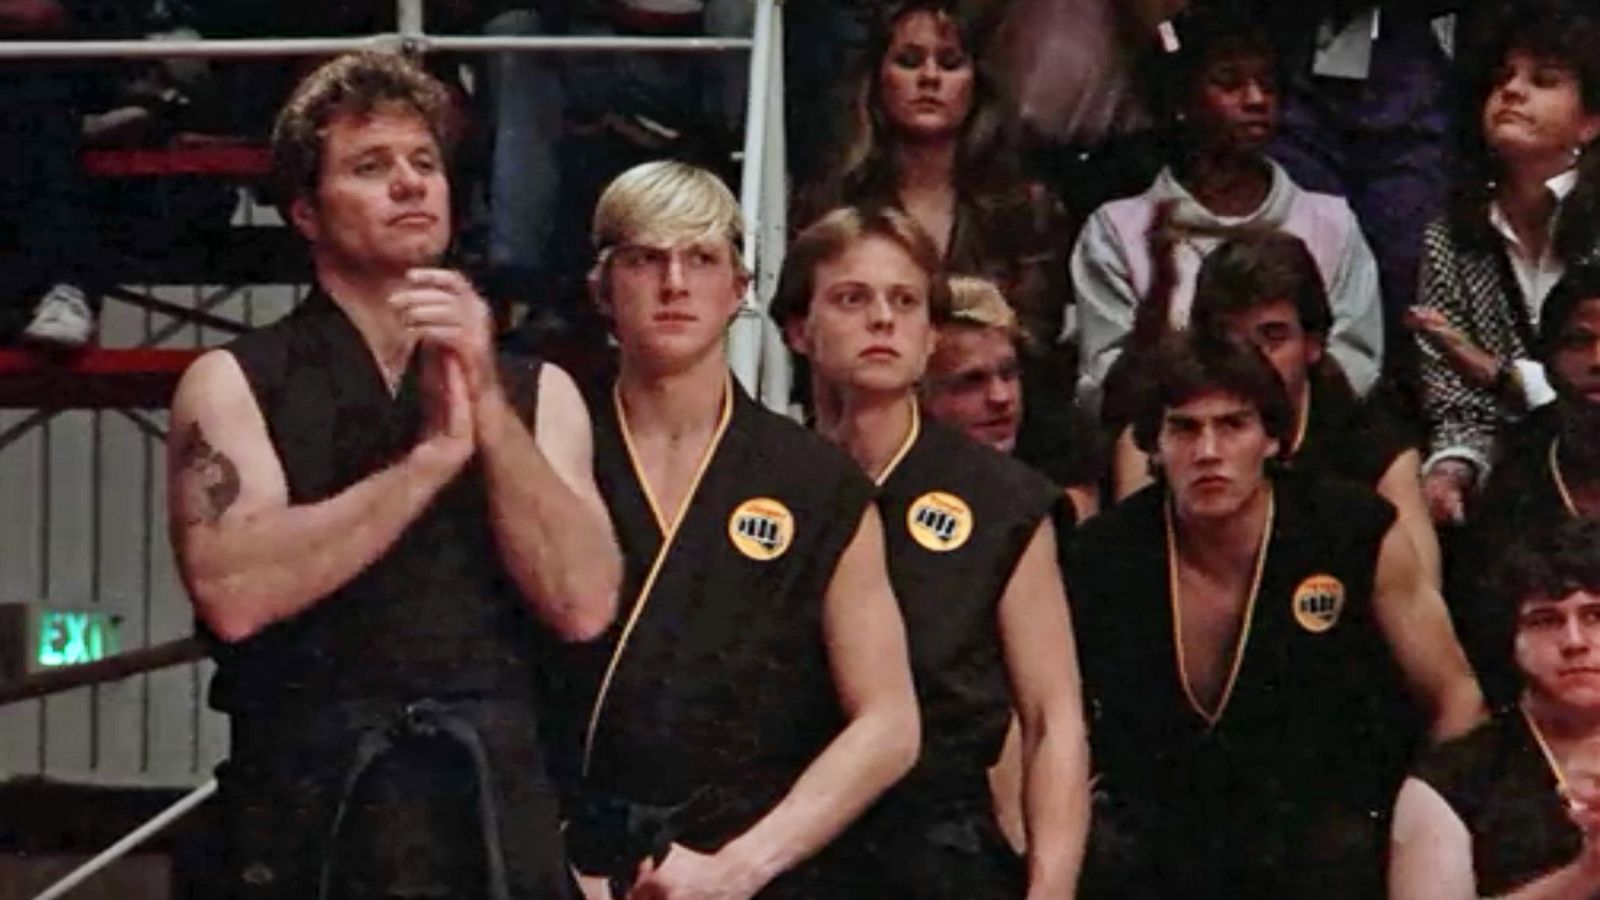 Sorry, But If You Weren’t Around During the ’80s You’re Going to Fail This Quiz Ht Karate Kid Cobra Jc 141009 16x9 1600